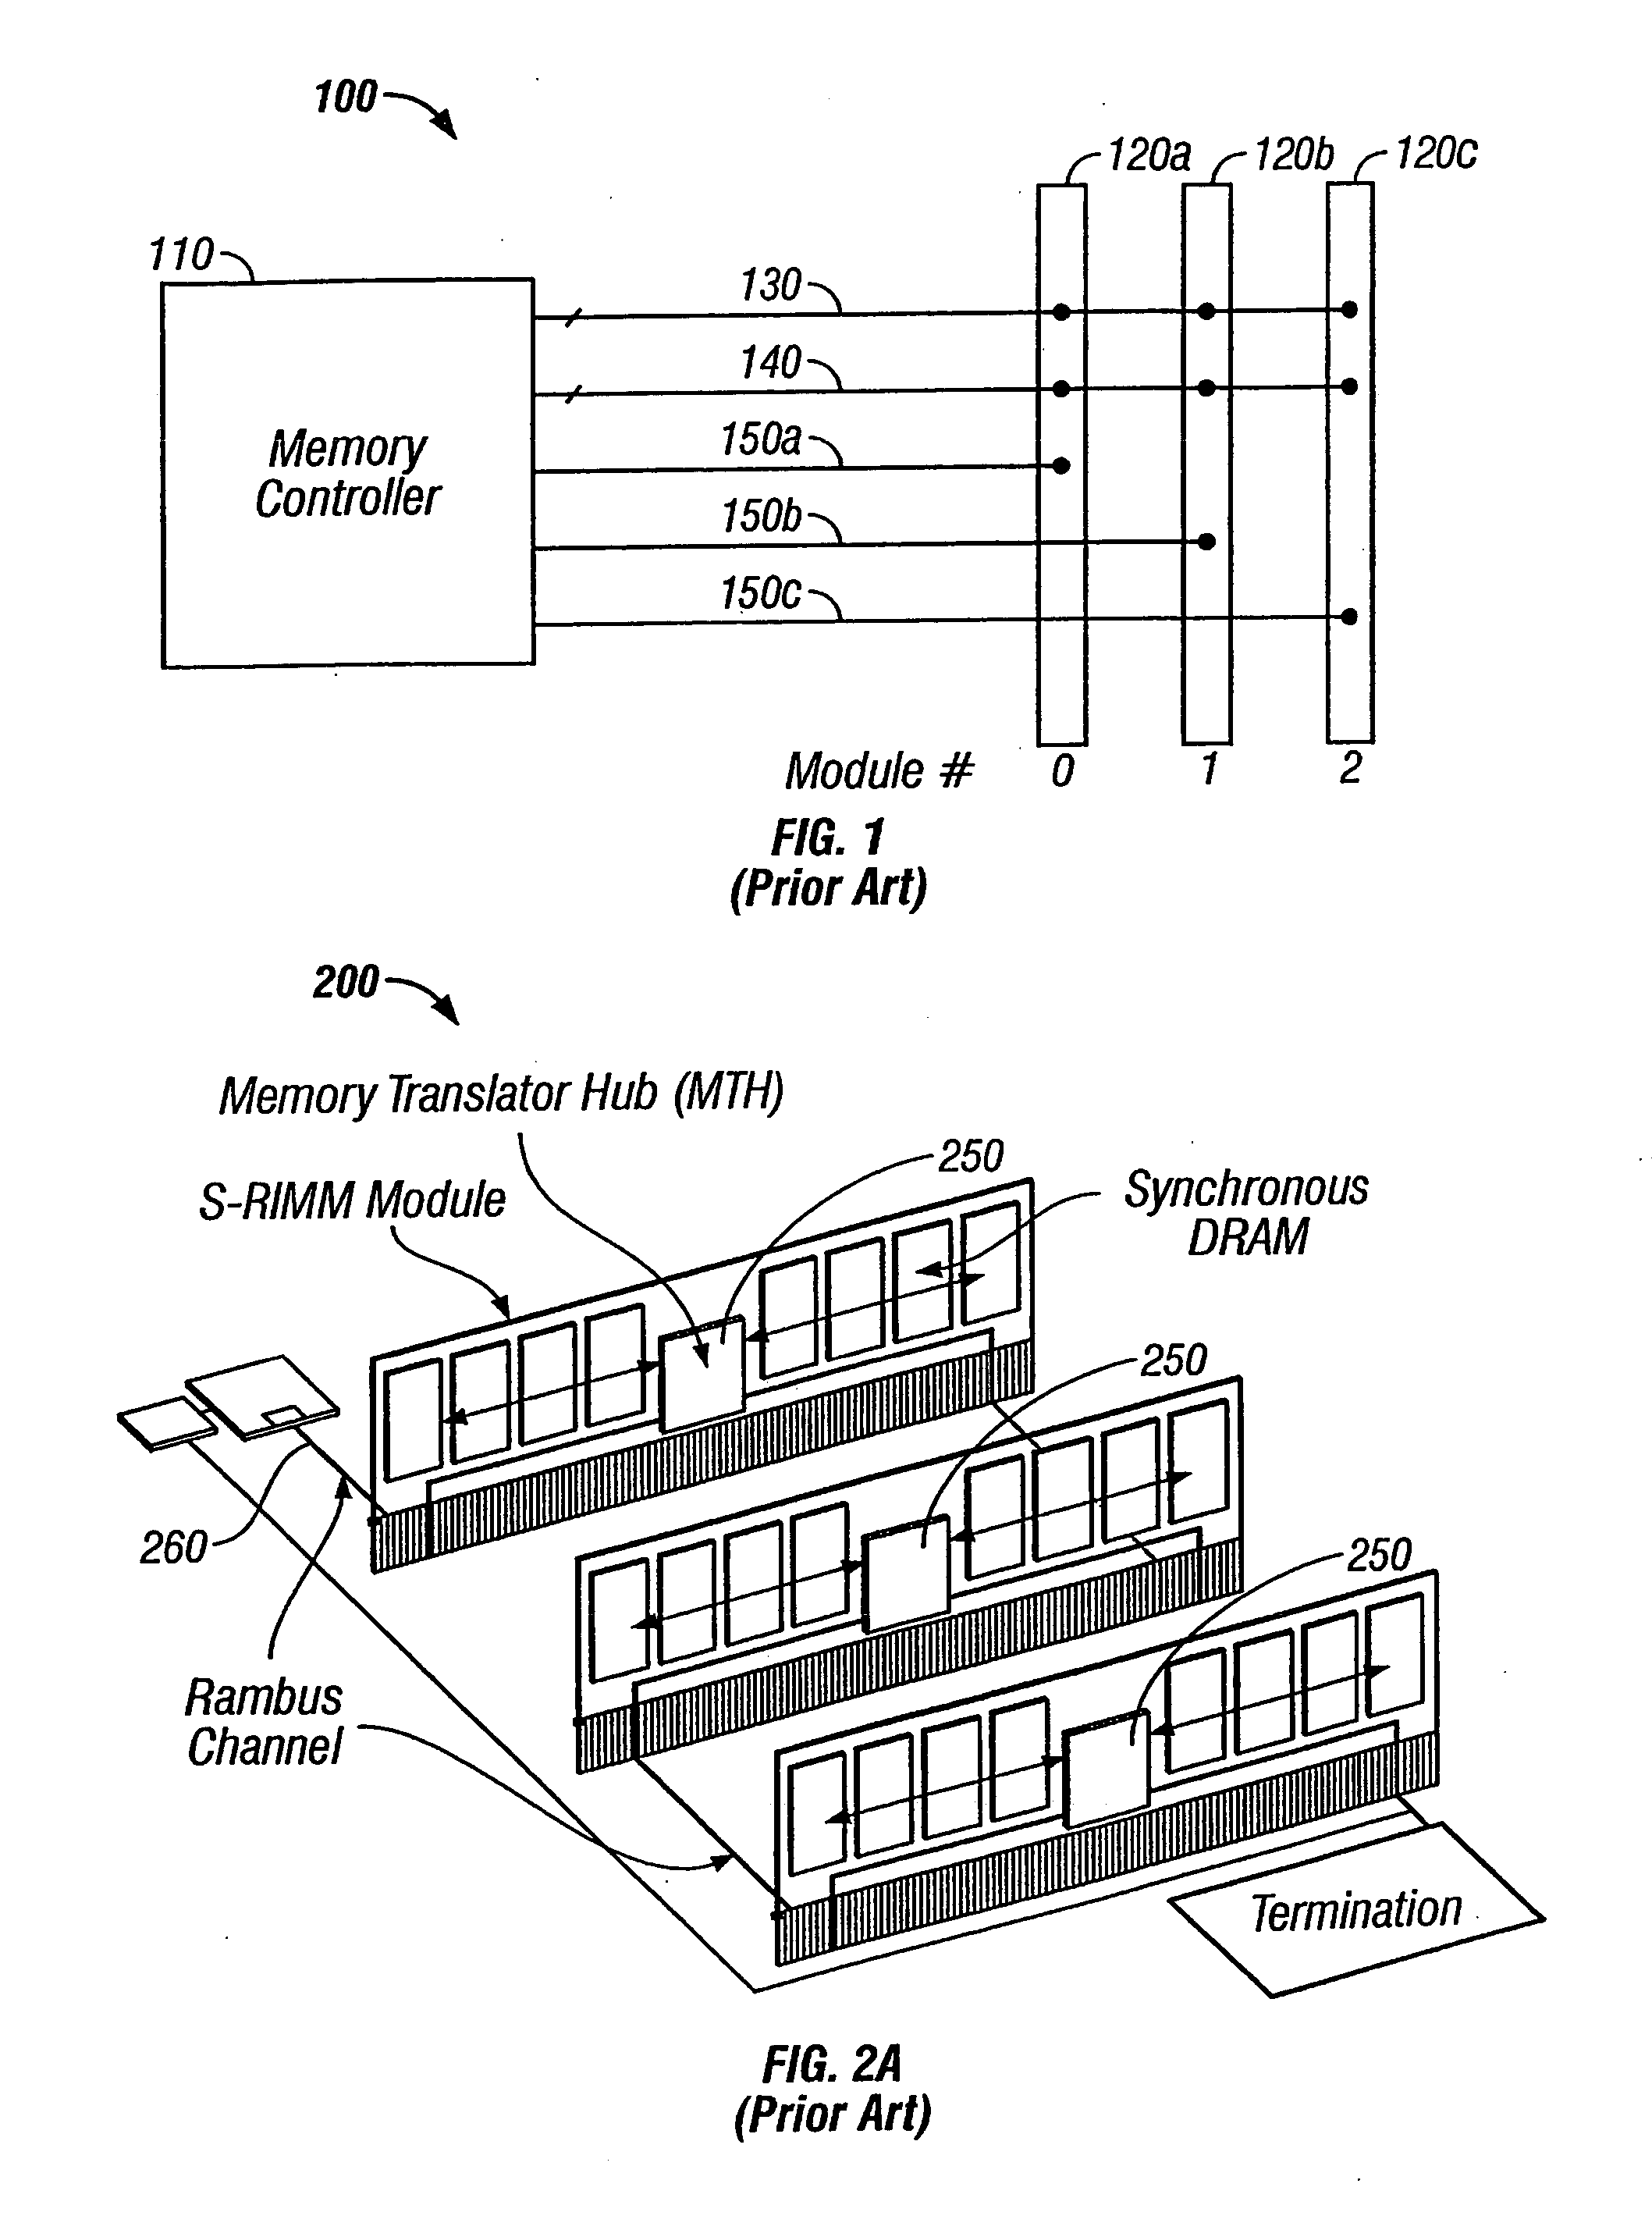 Method of operating a memory system including an integrated circuit buffer device